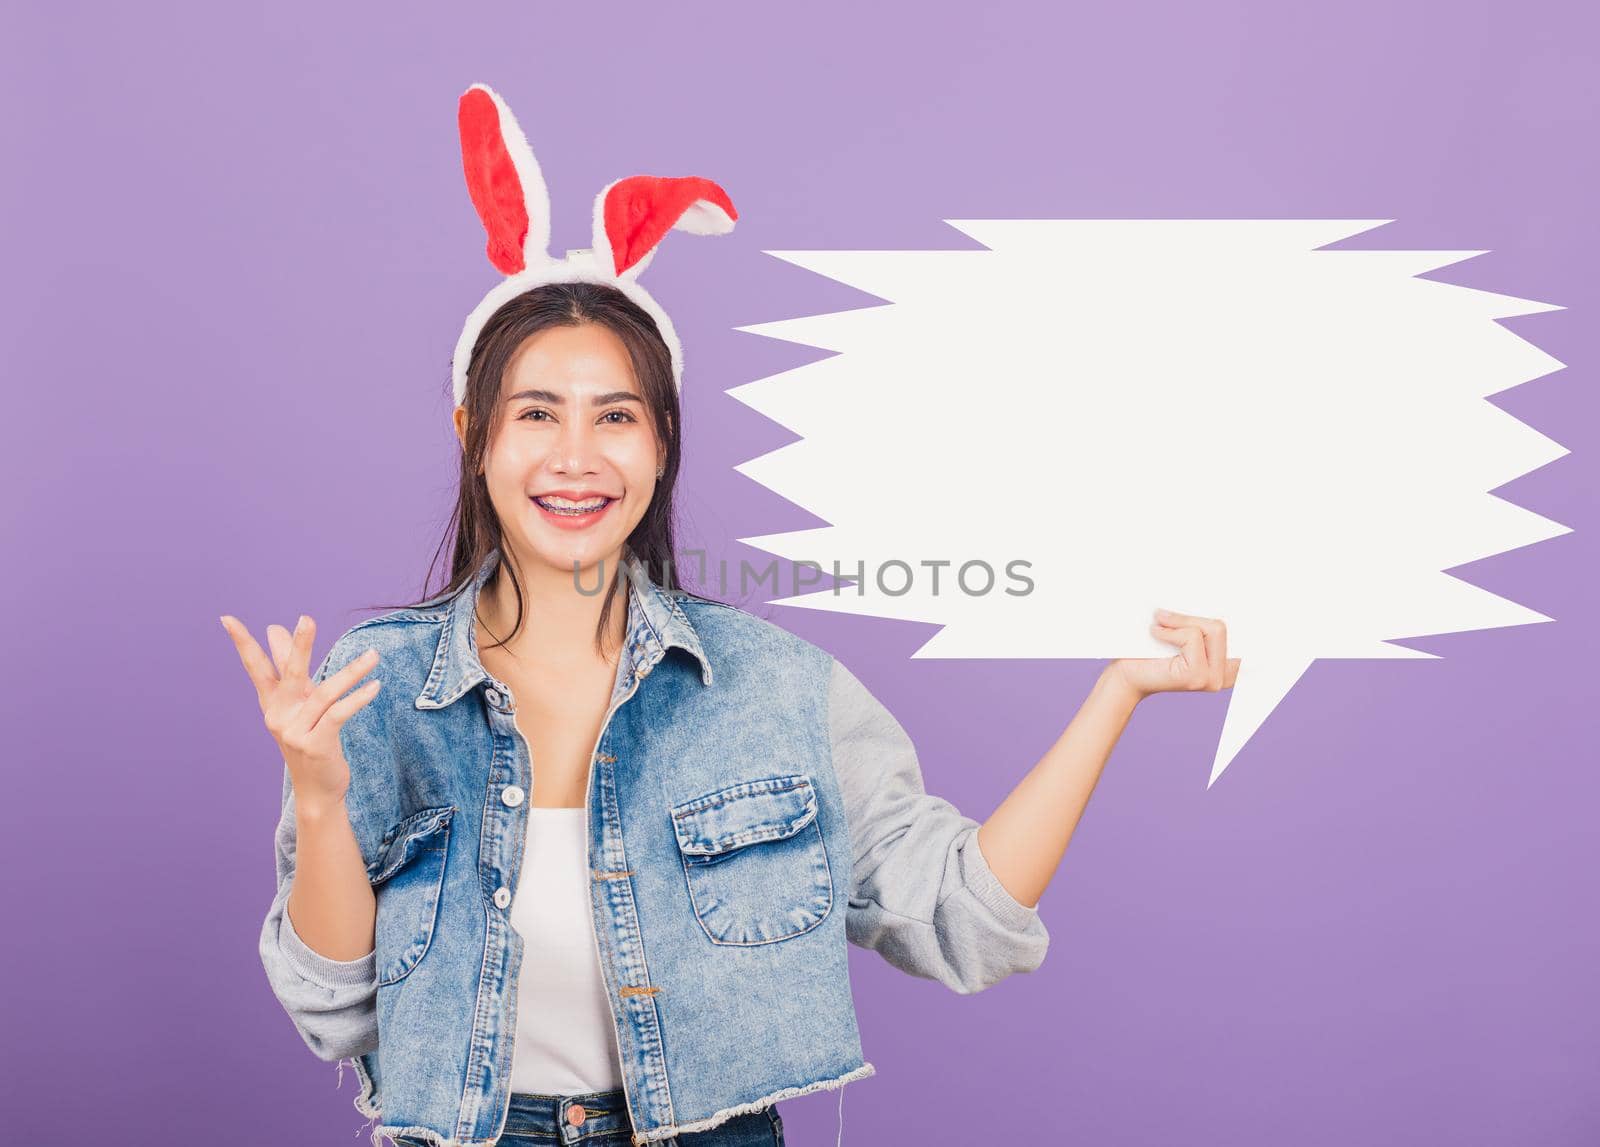 
Happy Easter Day. Beautiful young woman smiling excited wearing rabbit ears and denims holding empty speech bubble, Portrait female looking at camera, studio shot isolated on purple background